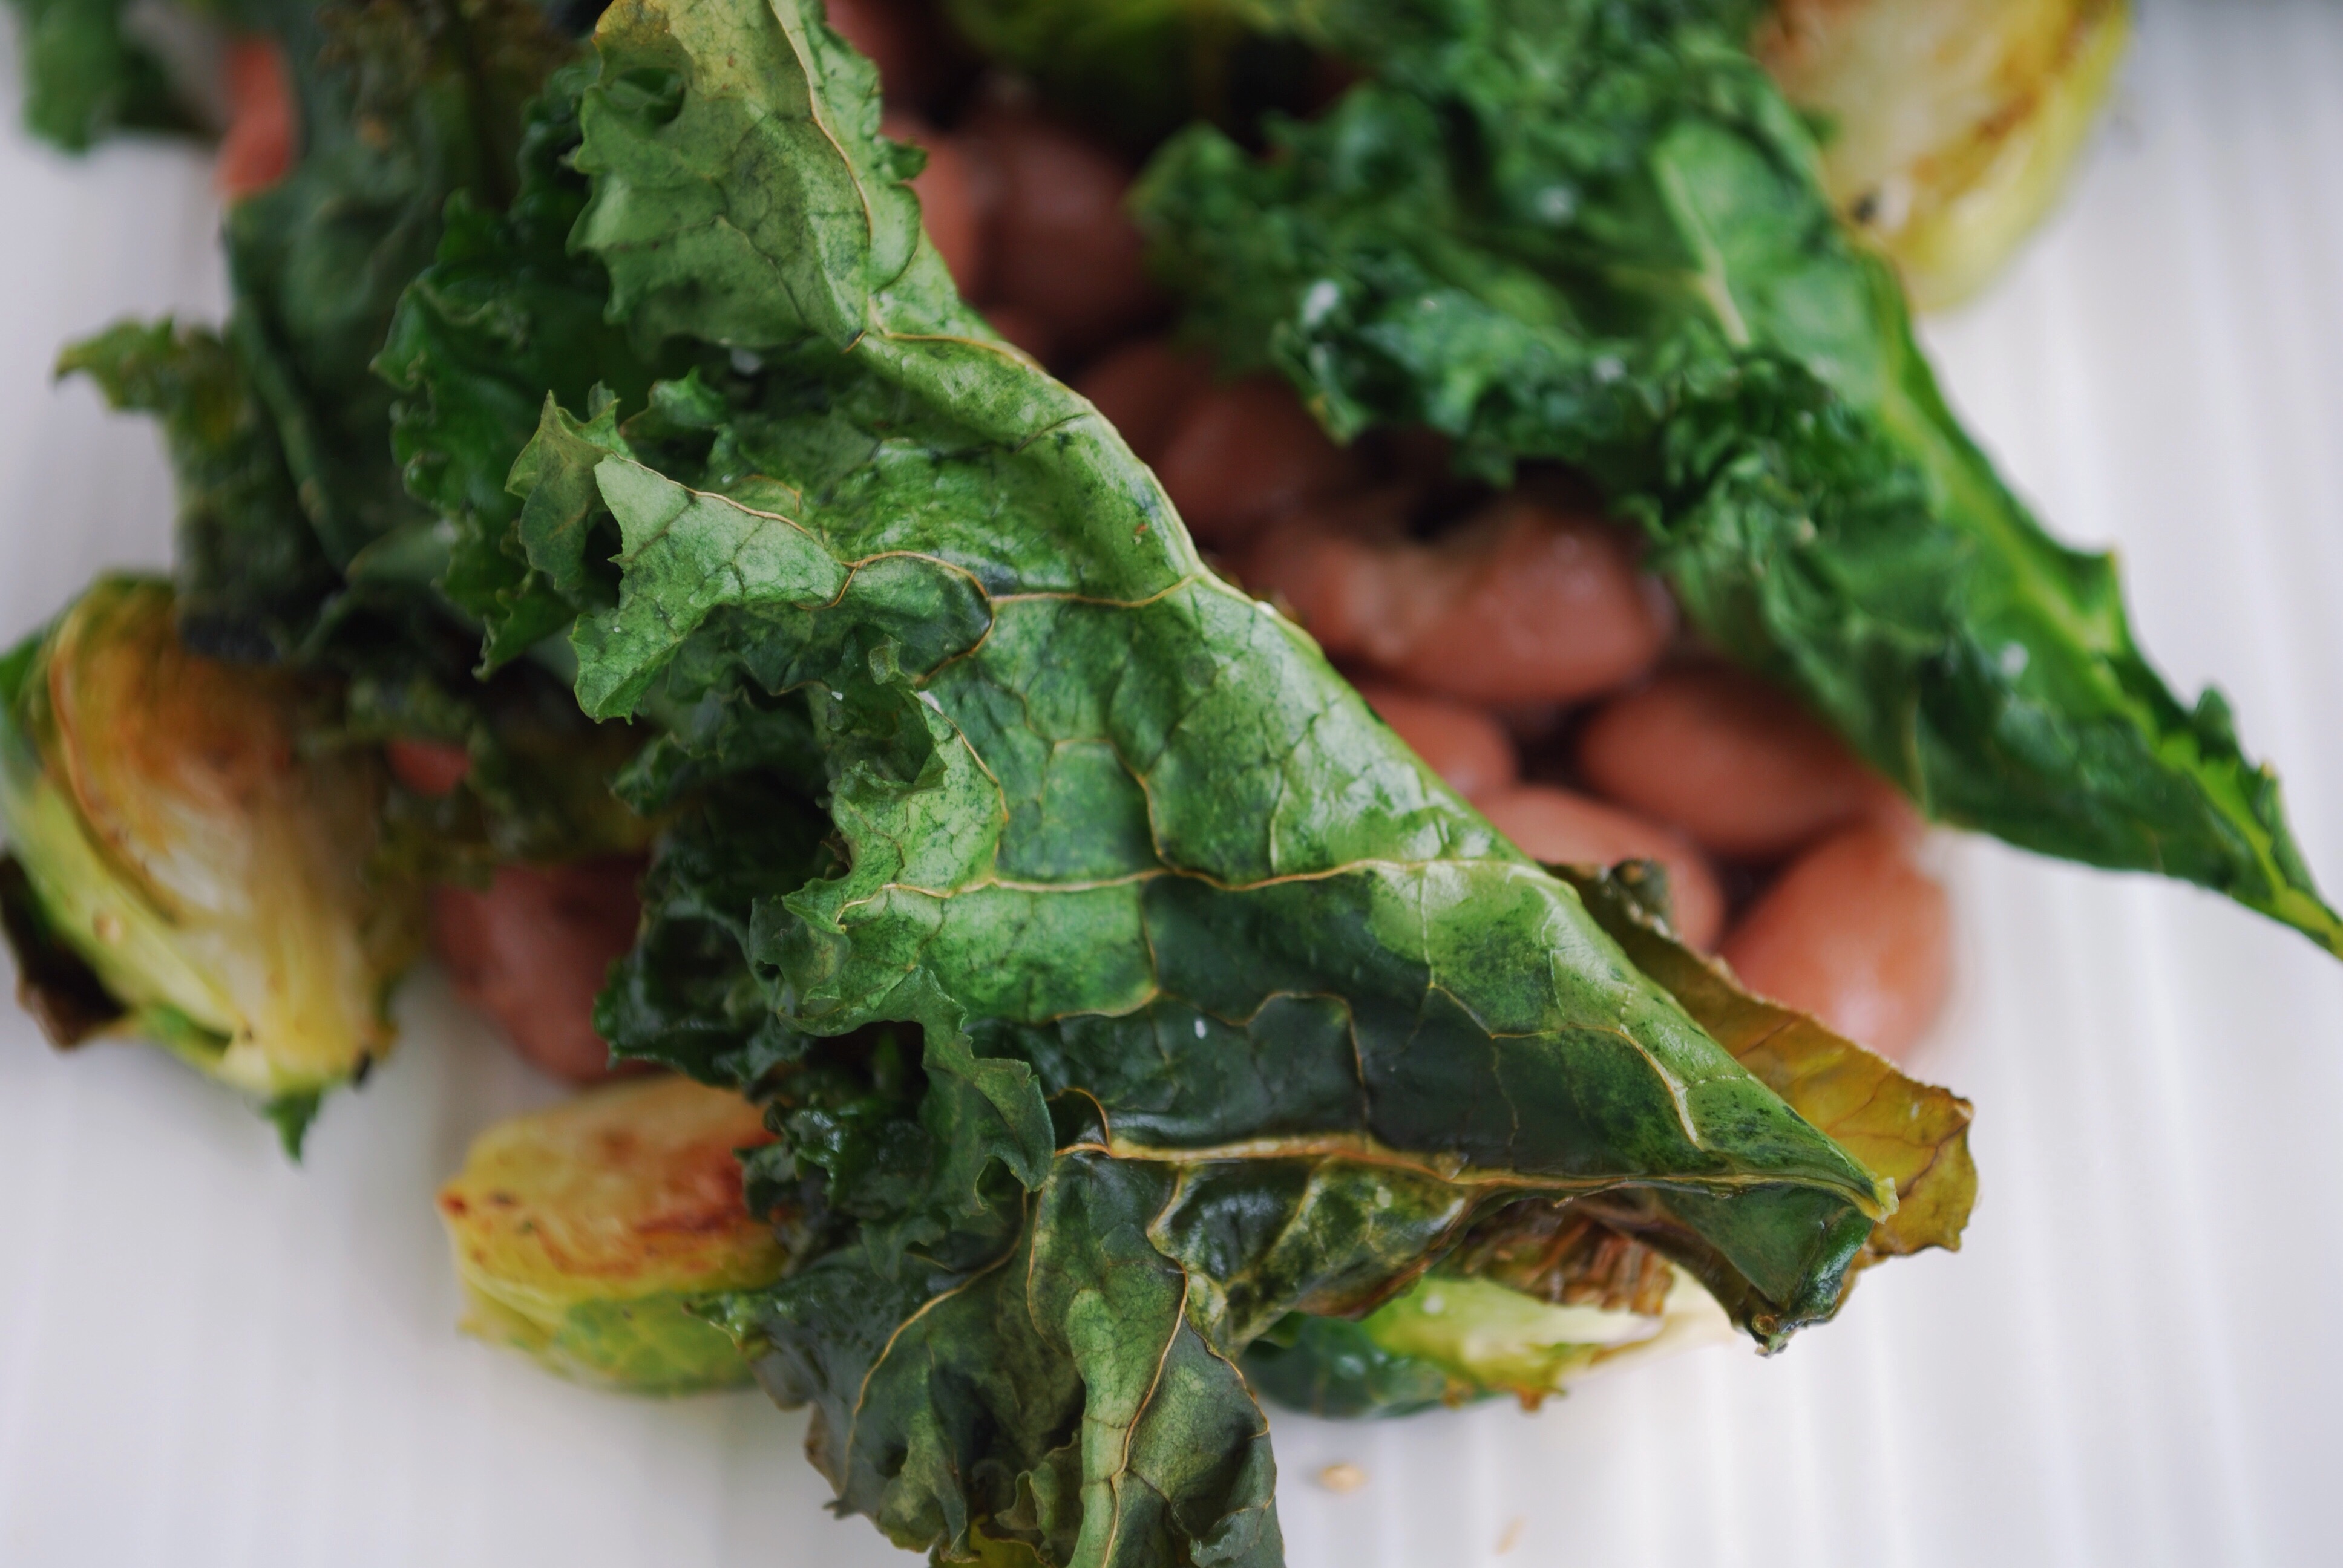 Kale & Pinto Beans: Crispy kale, creamy pinto beans, and sweet roasted brussels make up this play on a restaurant favorite! Filled with protein and vitamins, this healthy gluten free and vegan entrée is sure to satisfy! || fooduzzi.com